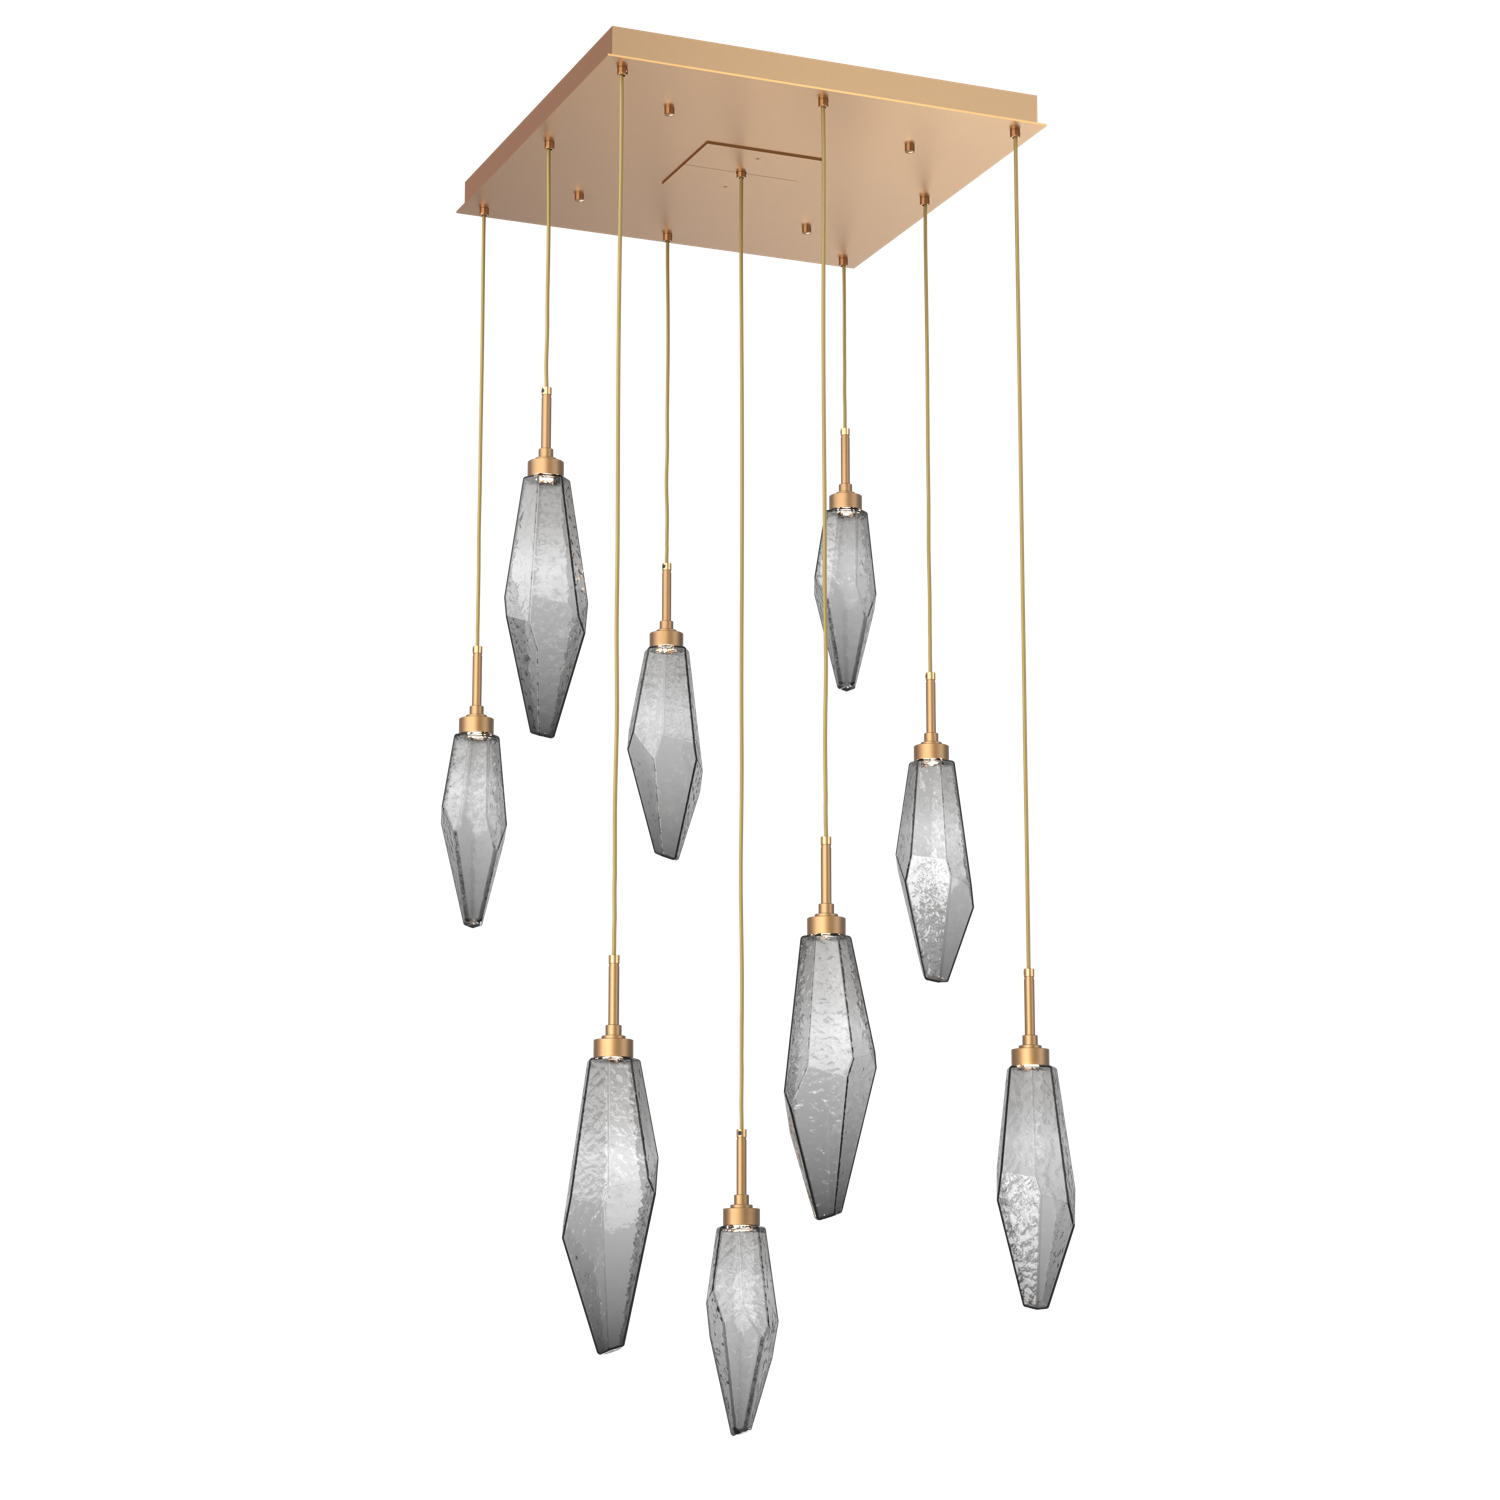 CHB0050-09-NB-CS-Hammerton-Studio-Rock-Crystal-9-light-square-pendant-chandelier-with-novel-brass-finish-and-chilled-smoke-glass-shades-and-LED-lamping